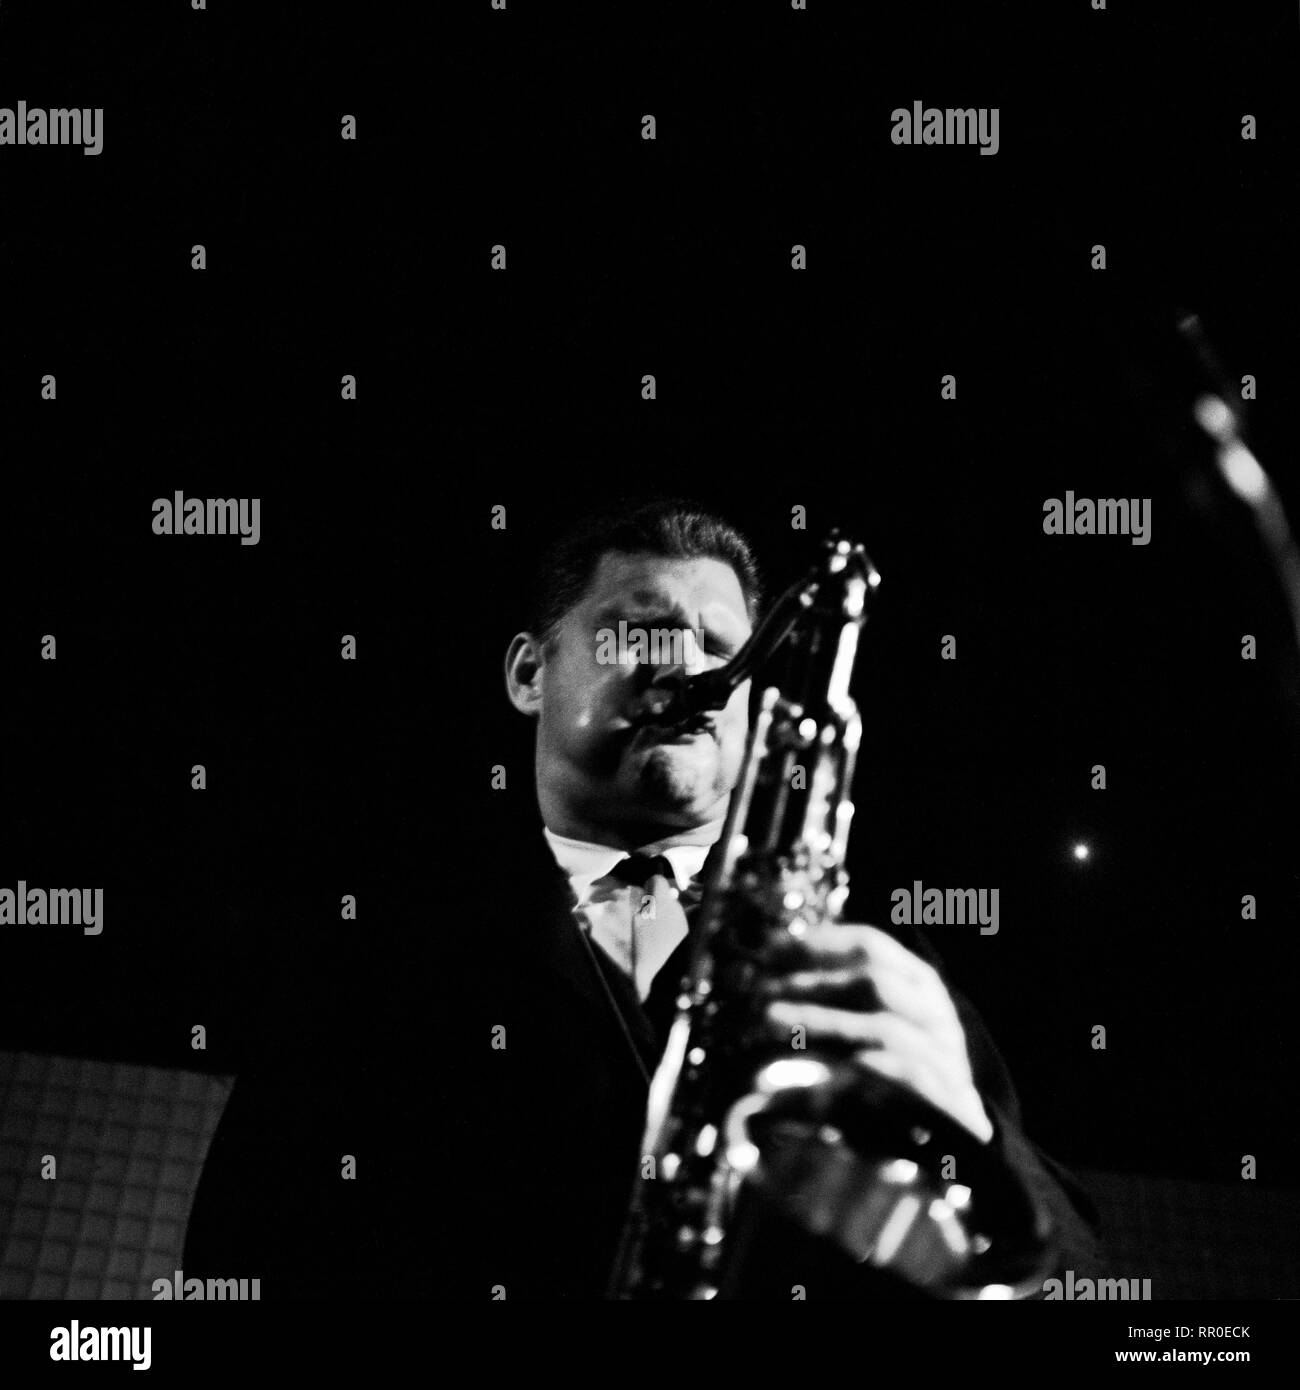 ZOOT SIMS / Überschrift: LES ZOOT SIMS Stock Photo